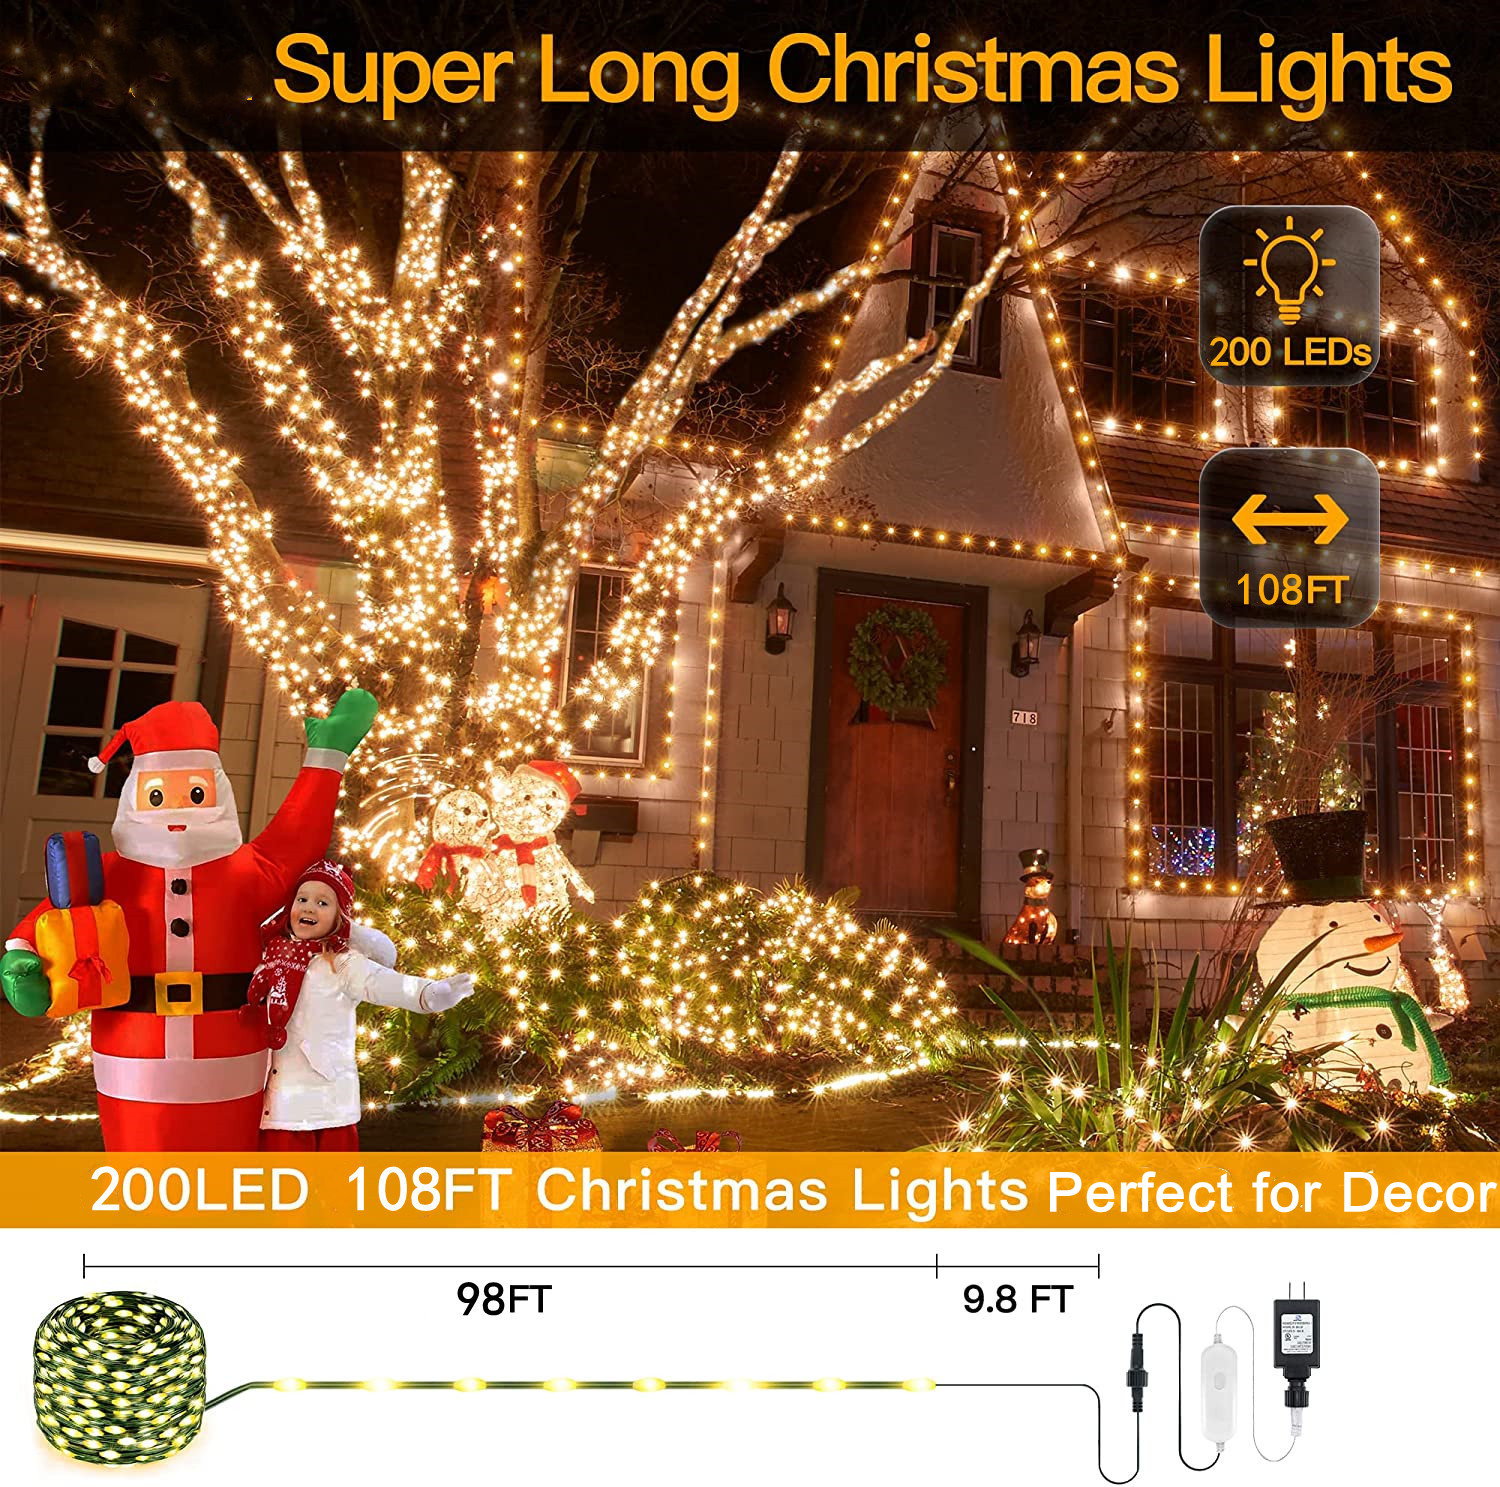 JUHEFA Christmas Lights Outdoor Indoor, 200LED 108FT Christmas Tree Lights IP67 Waterproof, 8 Modes Plug in for House Bedroom Party Yard Decorations, Warm White - image 2 of 8